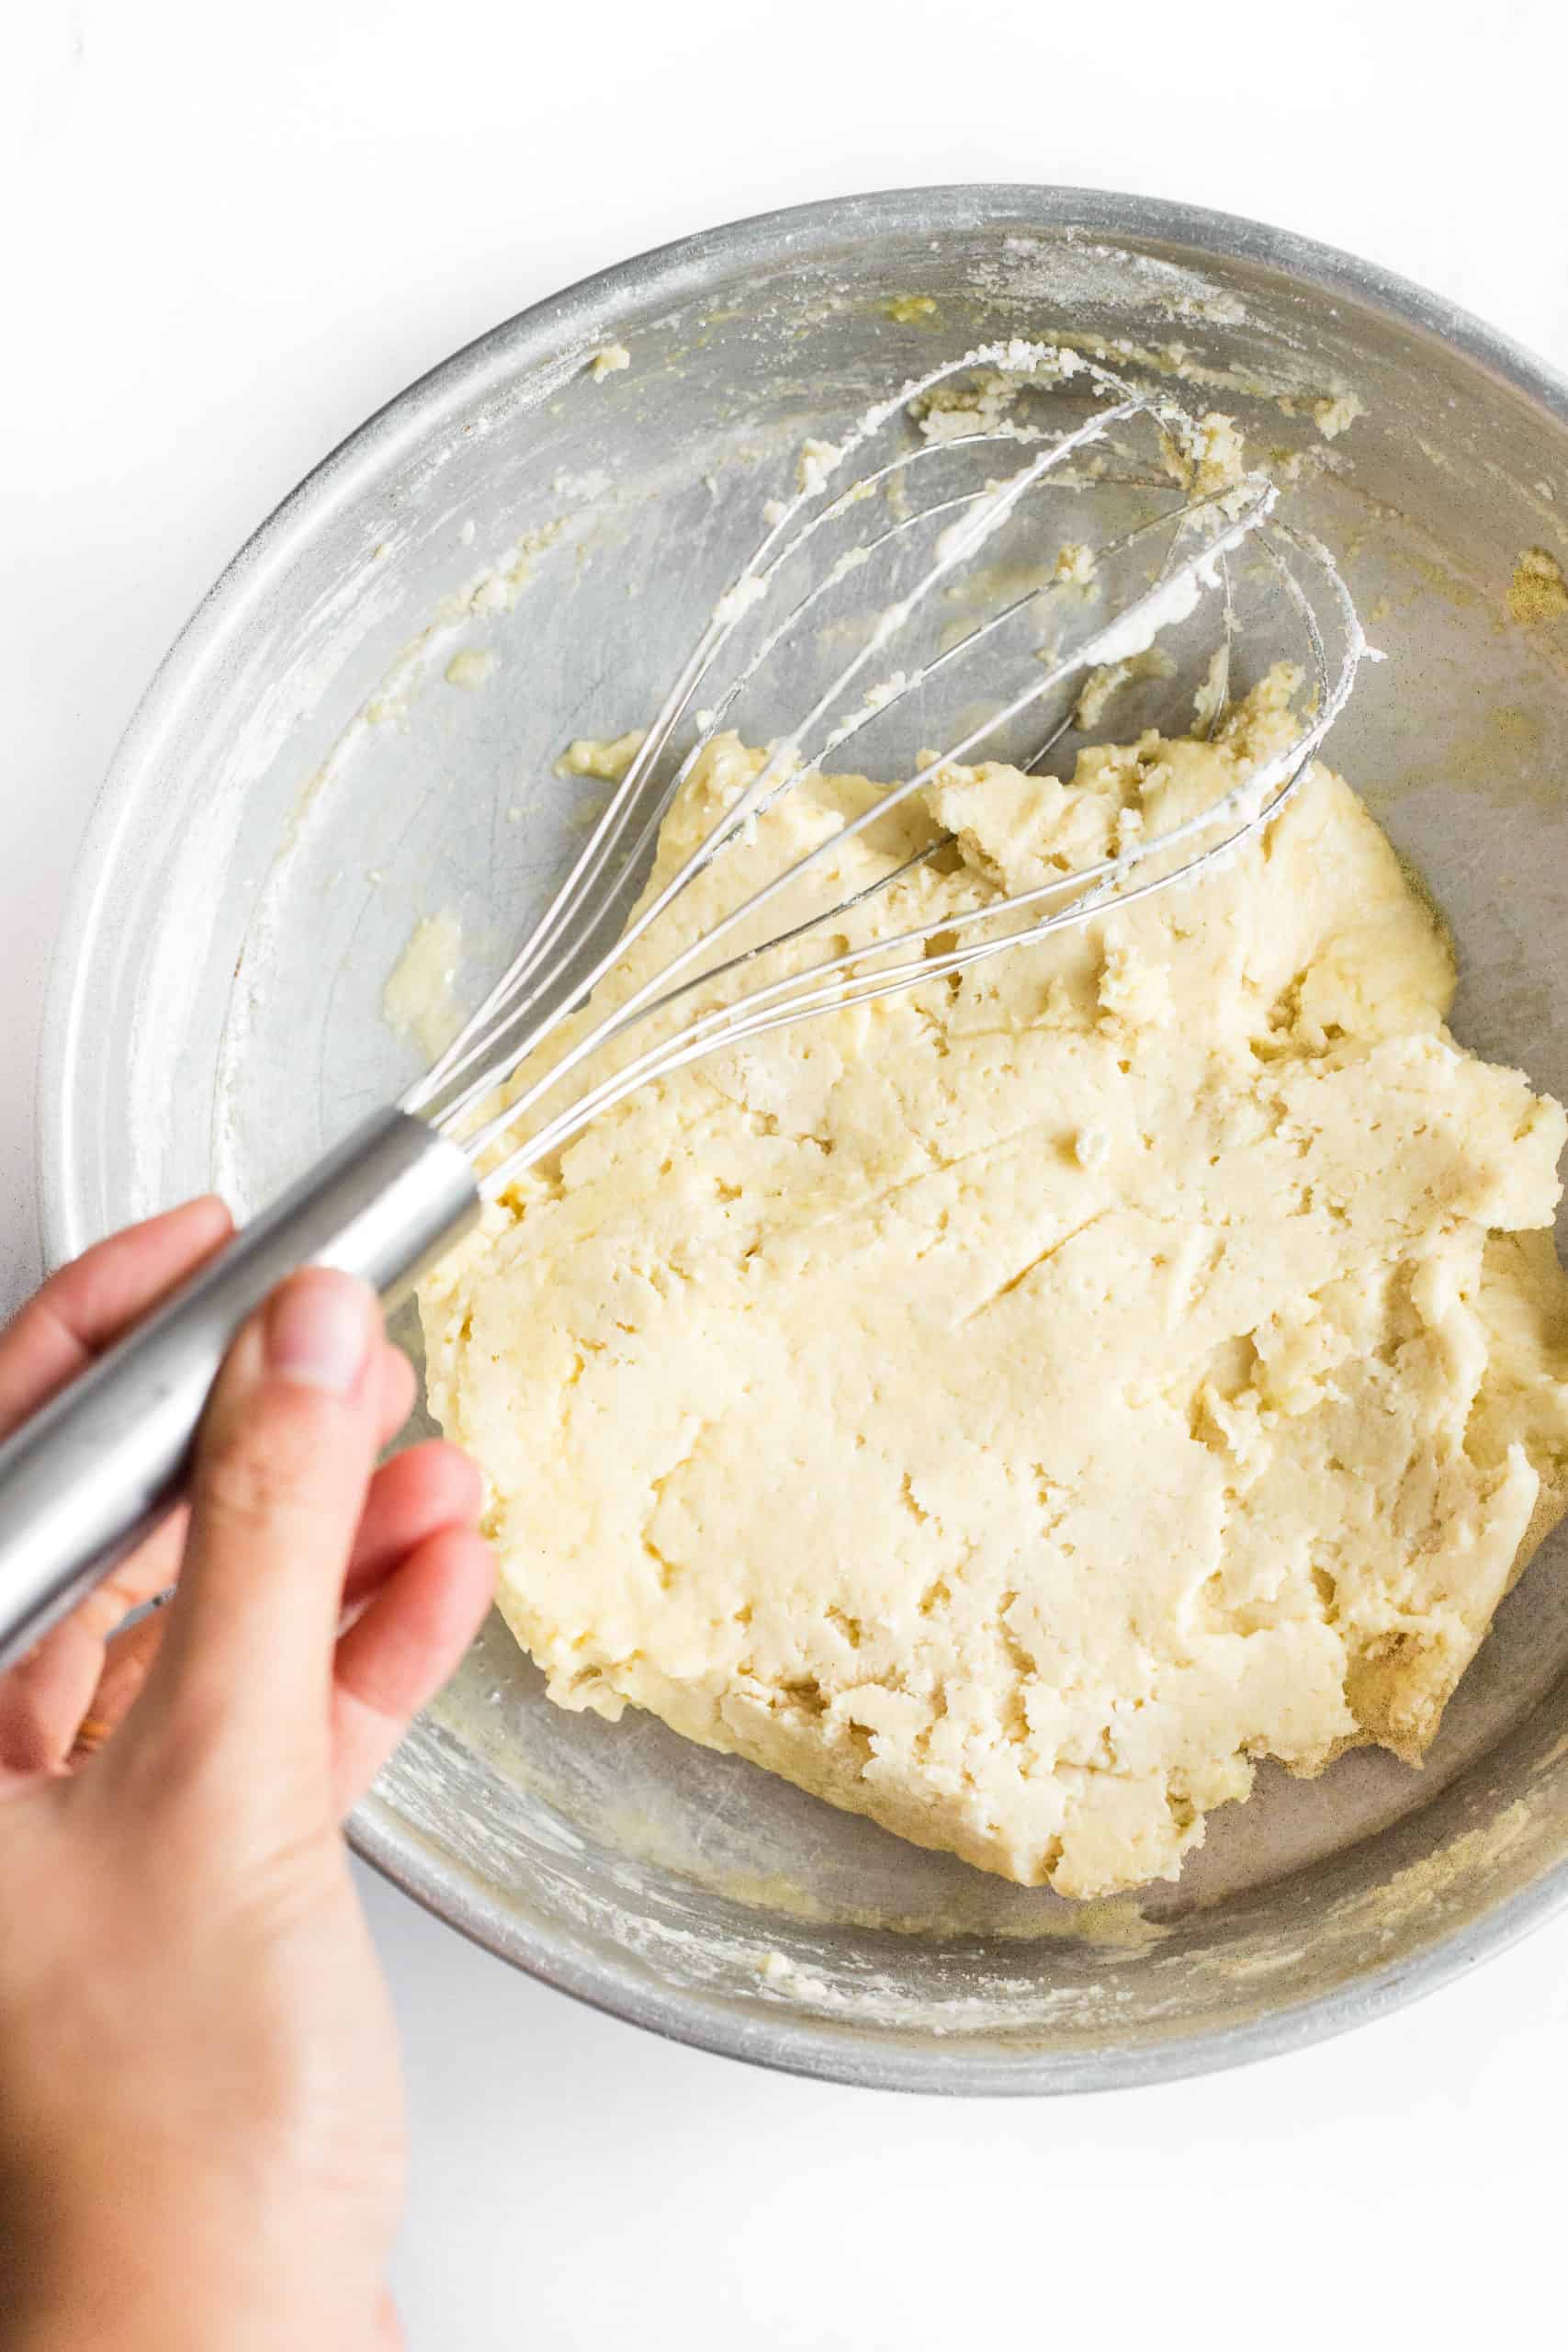 Mixing gluten-free pizza crust dough in a large metal bowl.